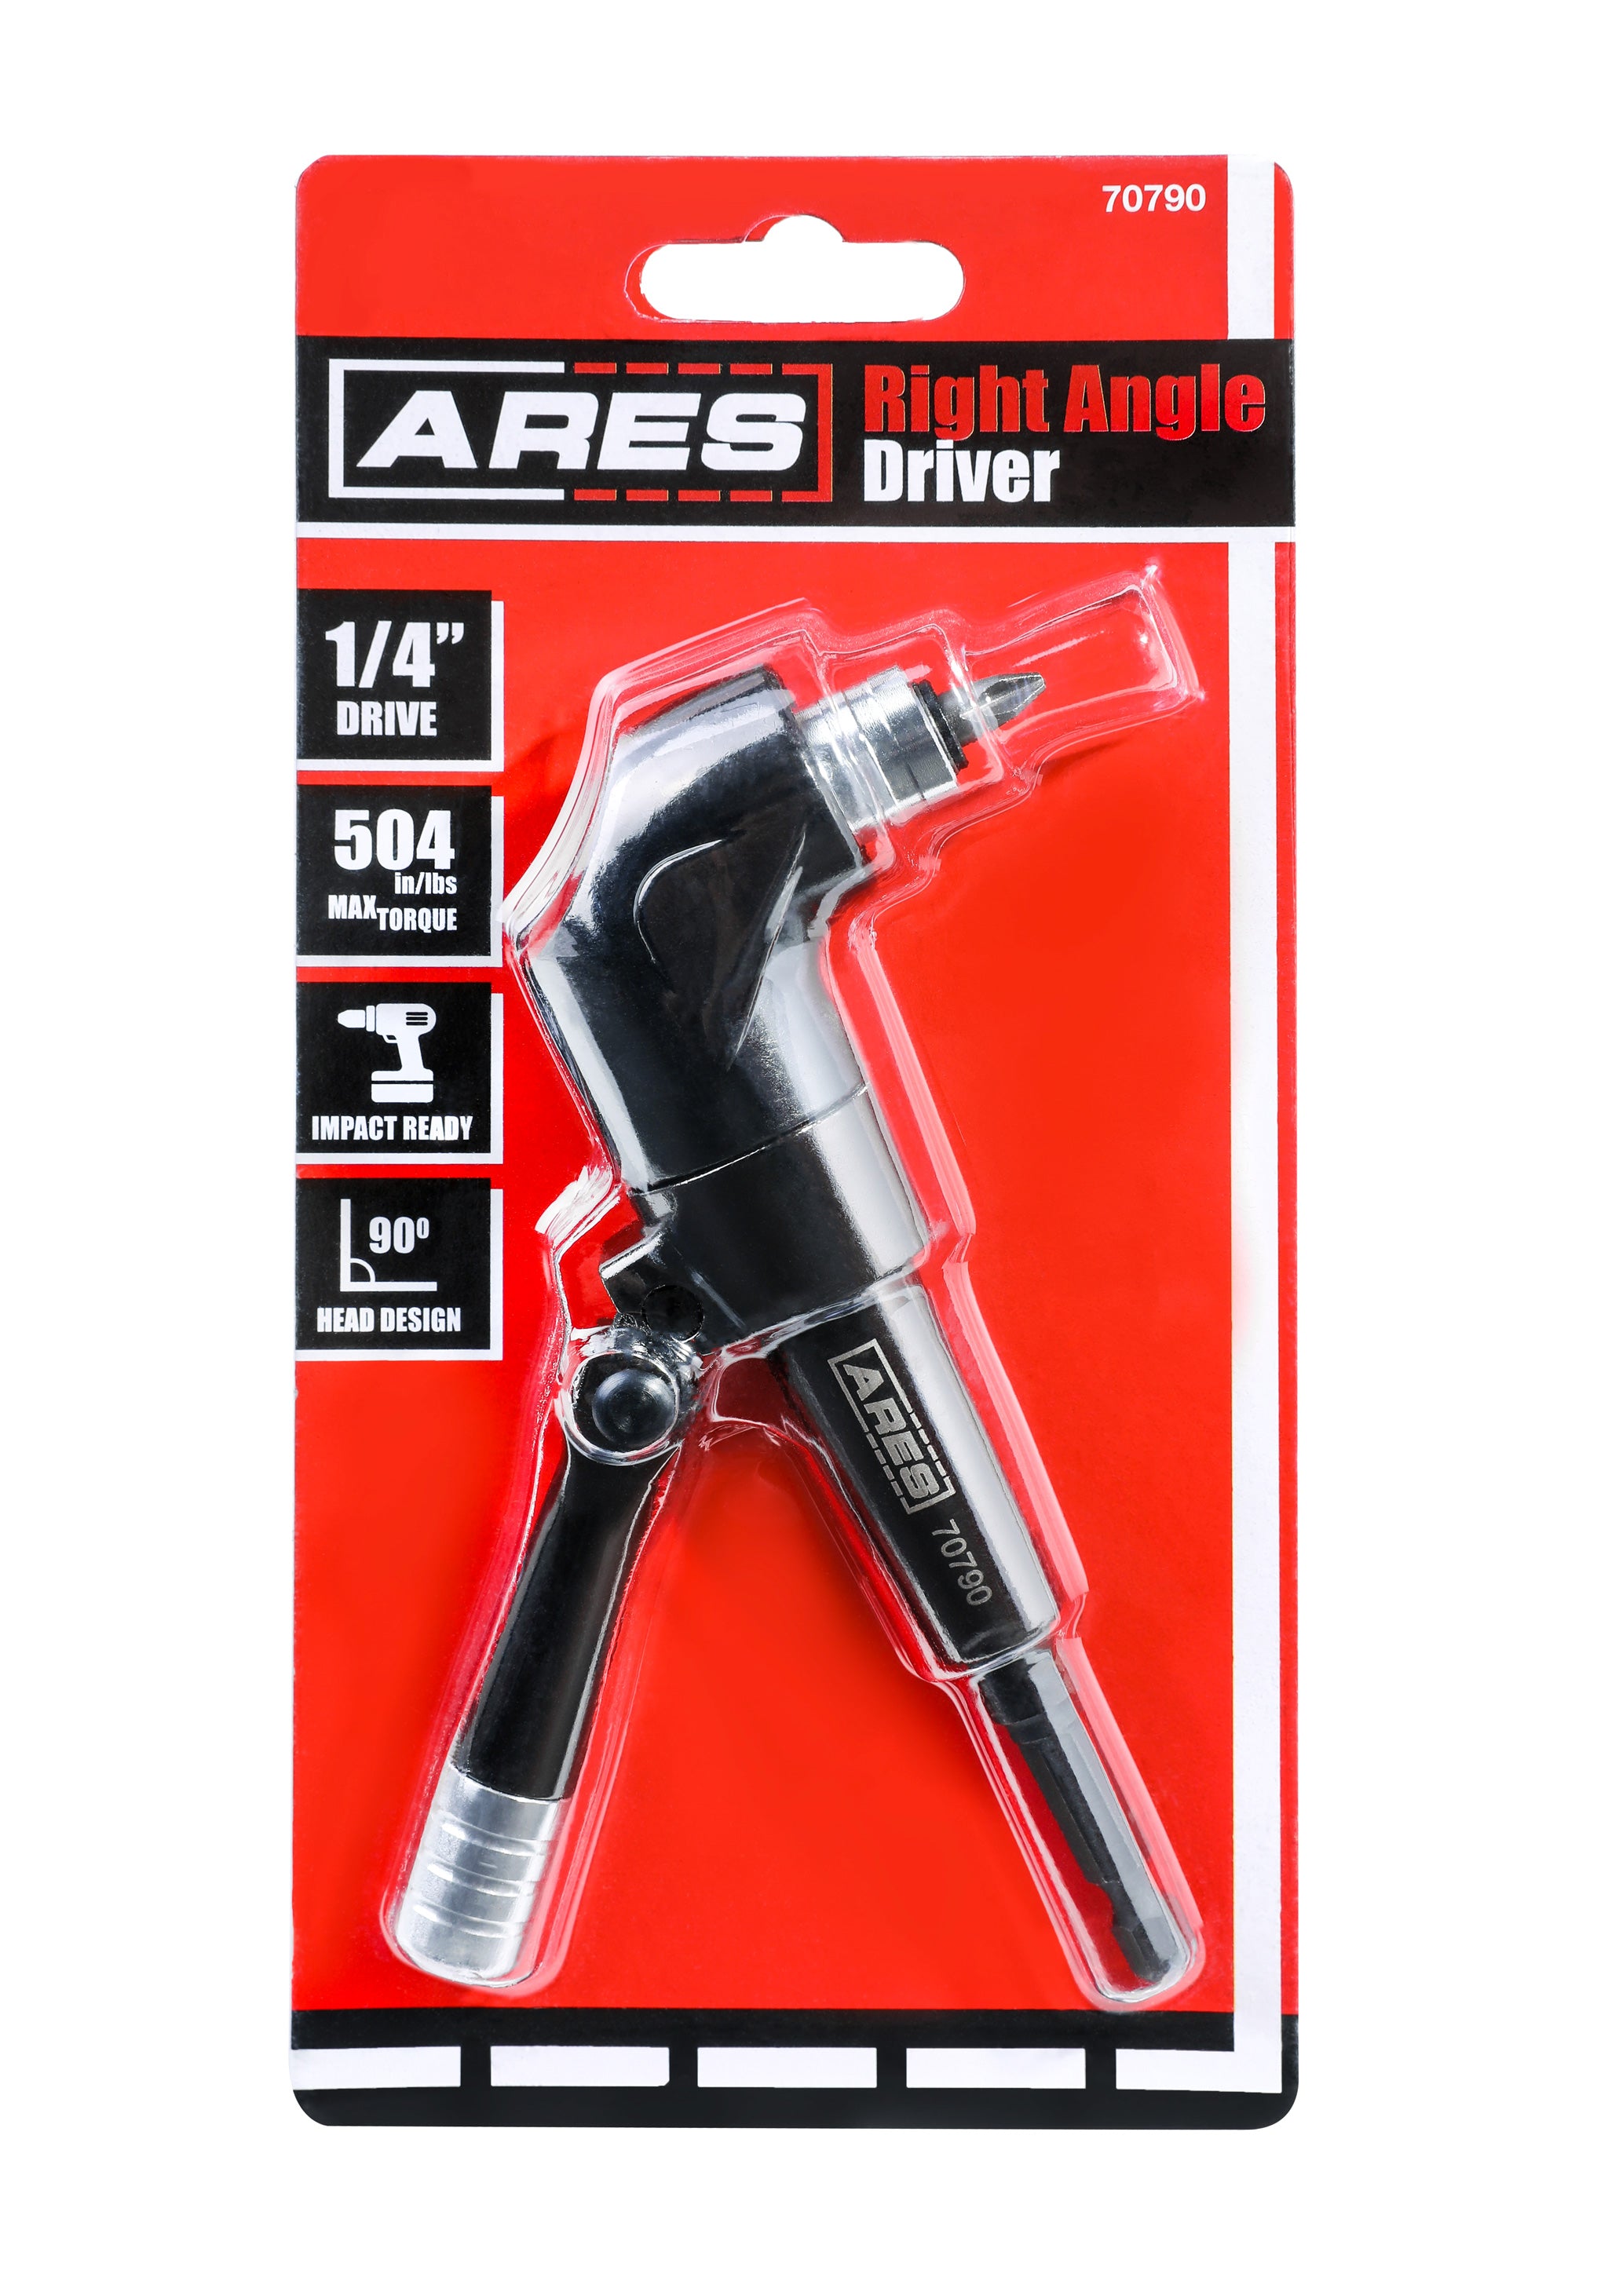 ARES 70790 - Right Angle Driver - Max Torque of 504 in/lbs - for Use with  18 Volt or 2,000 RPM Drills - Features Quick Release - Easily Swap Out